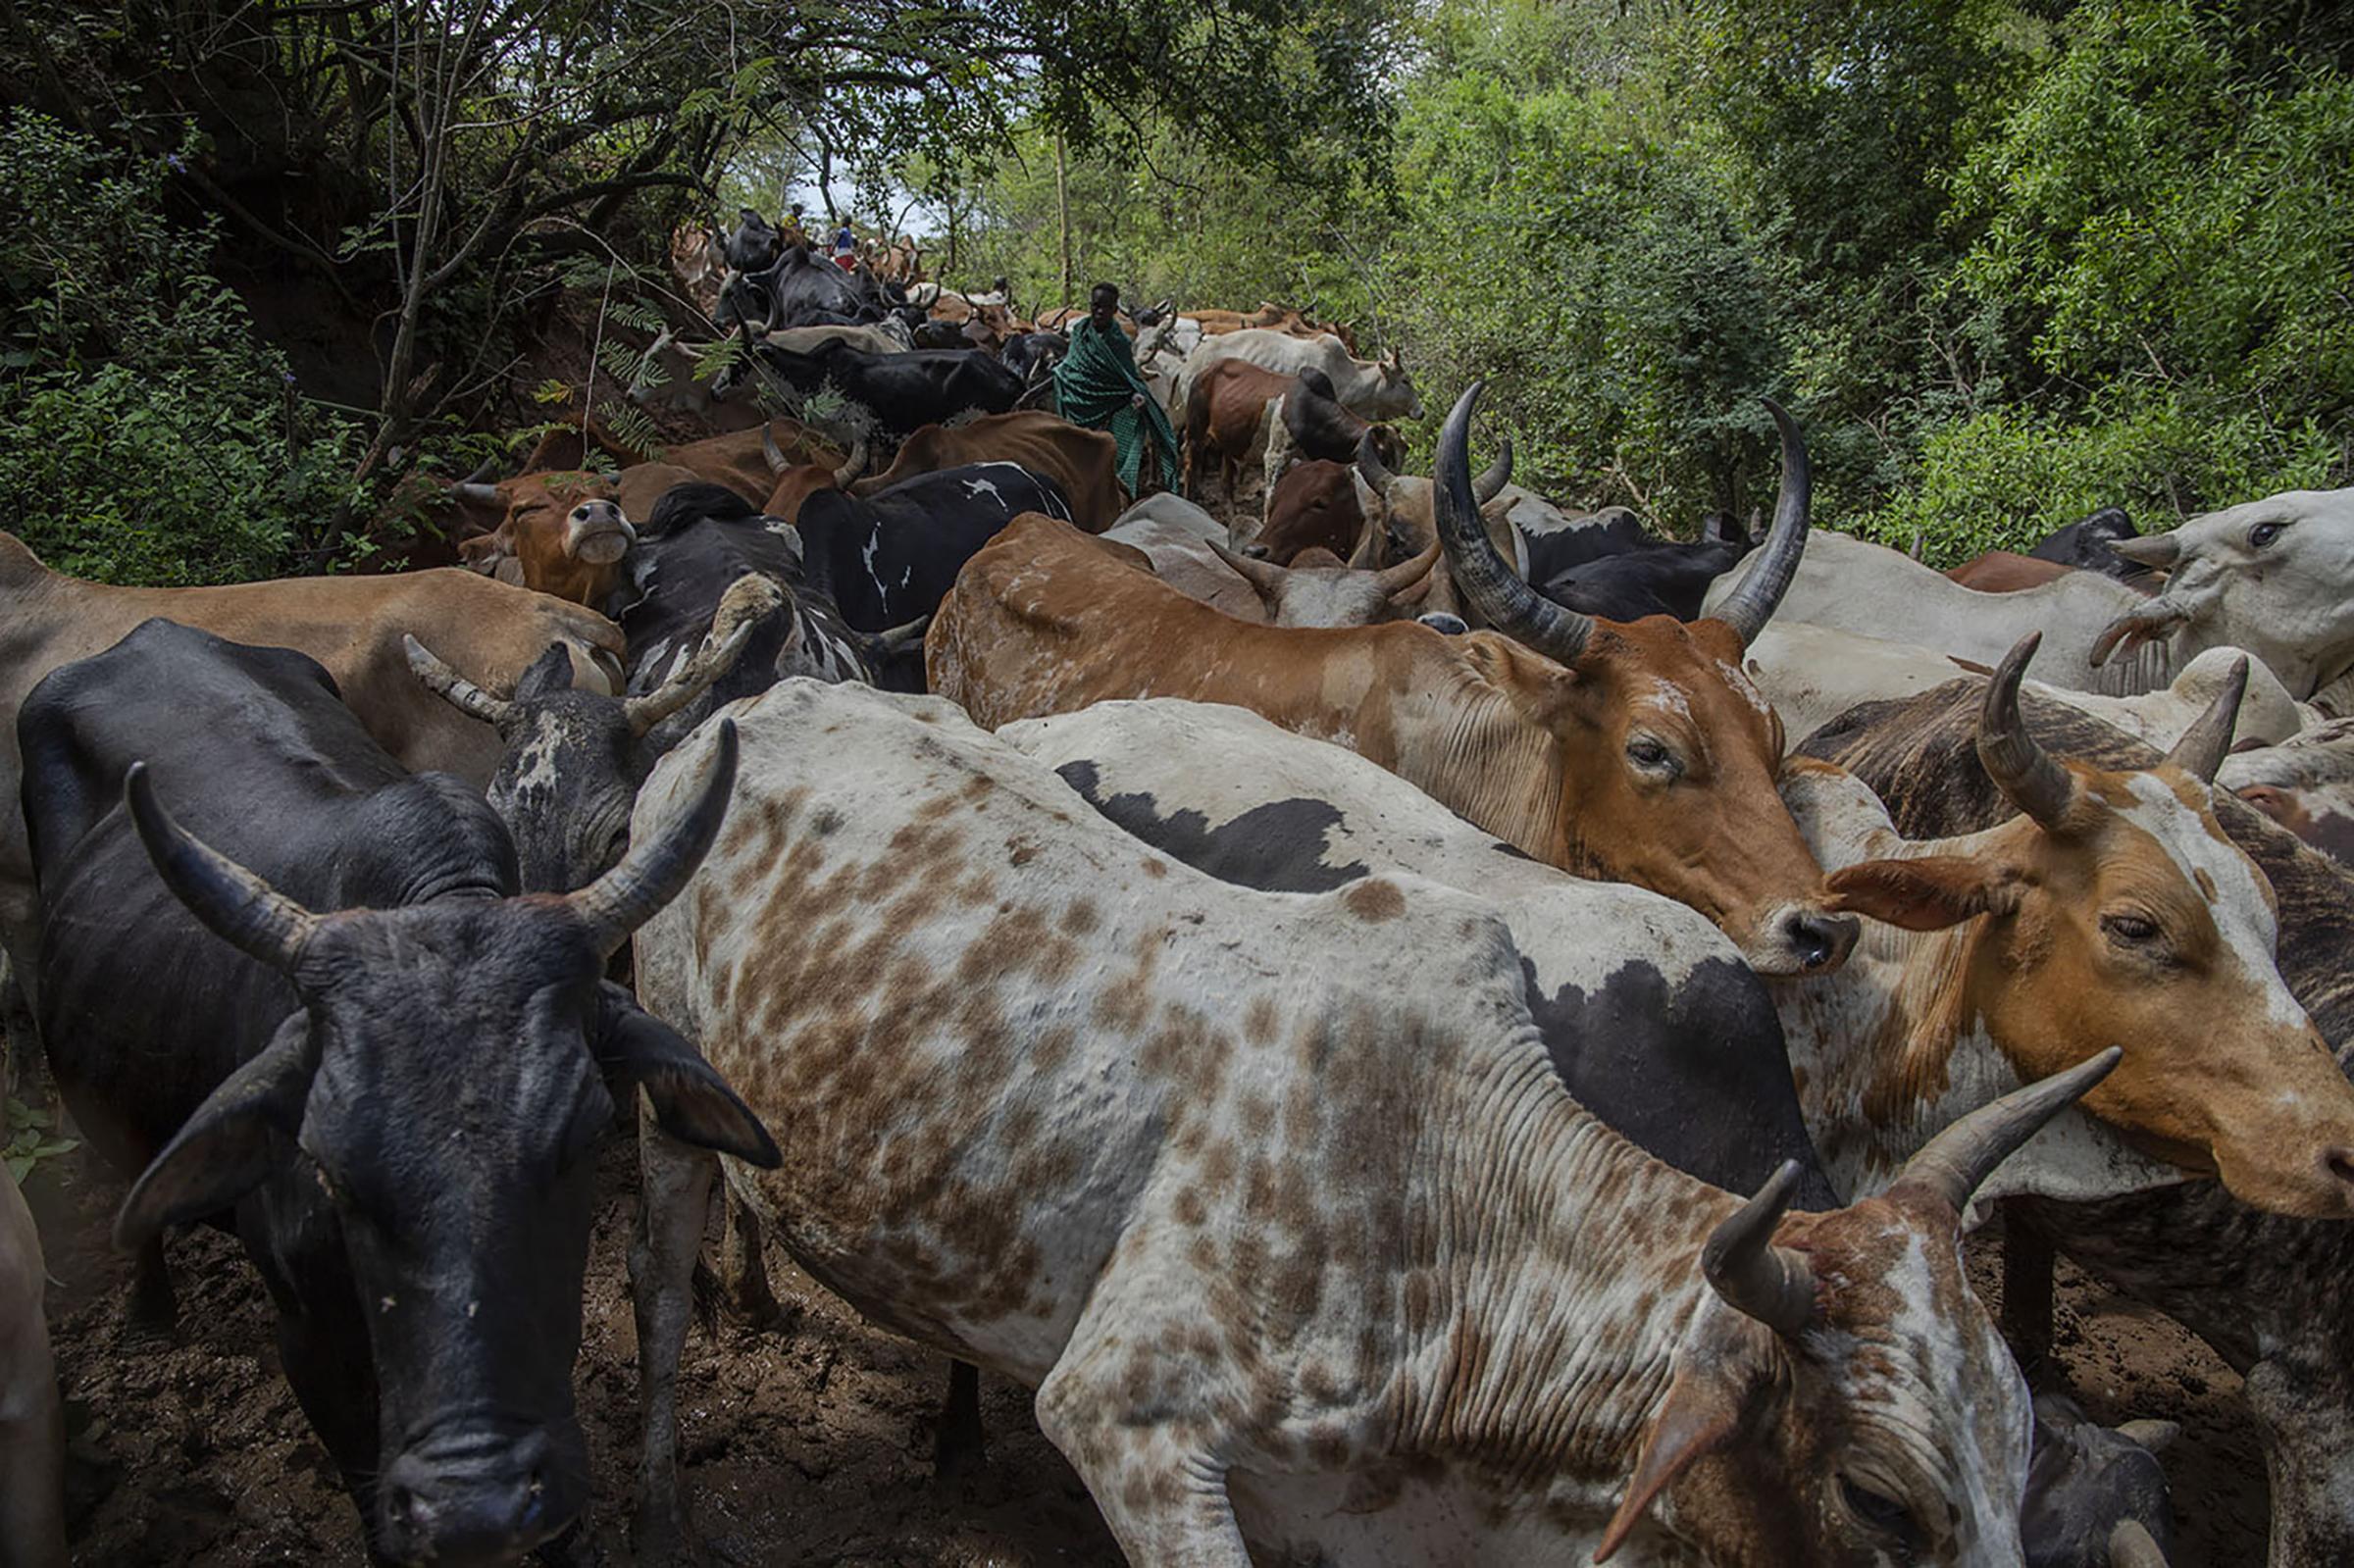  At about 10 a.m. when the dew has fallen, the herders start the move with their cows, carrying...